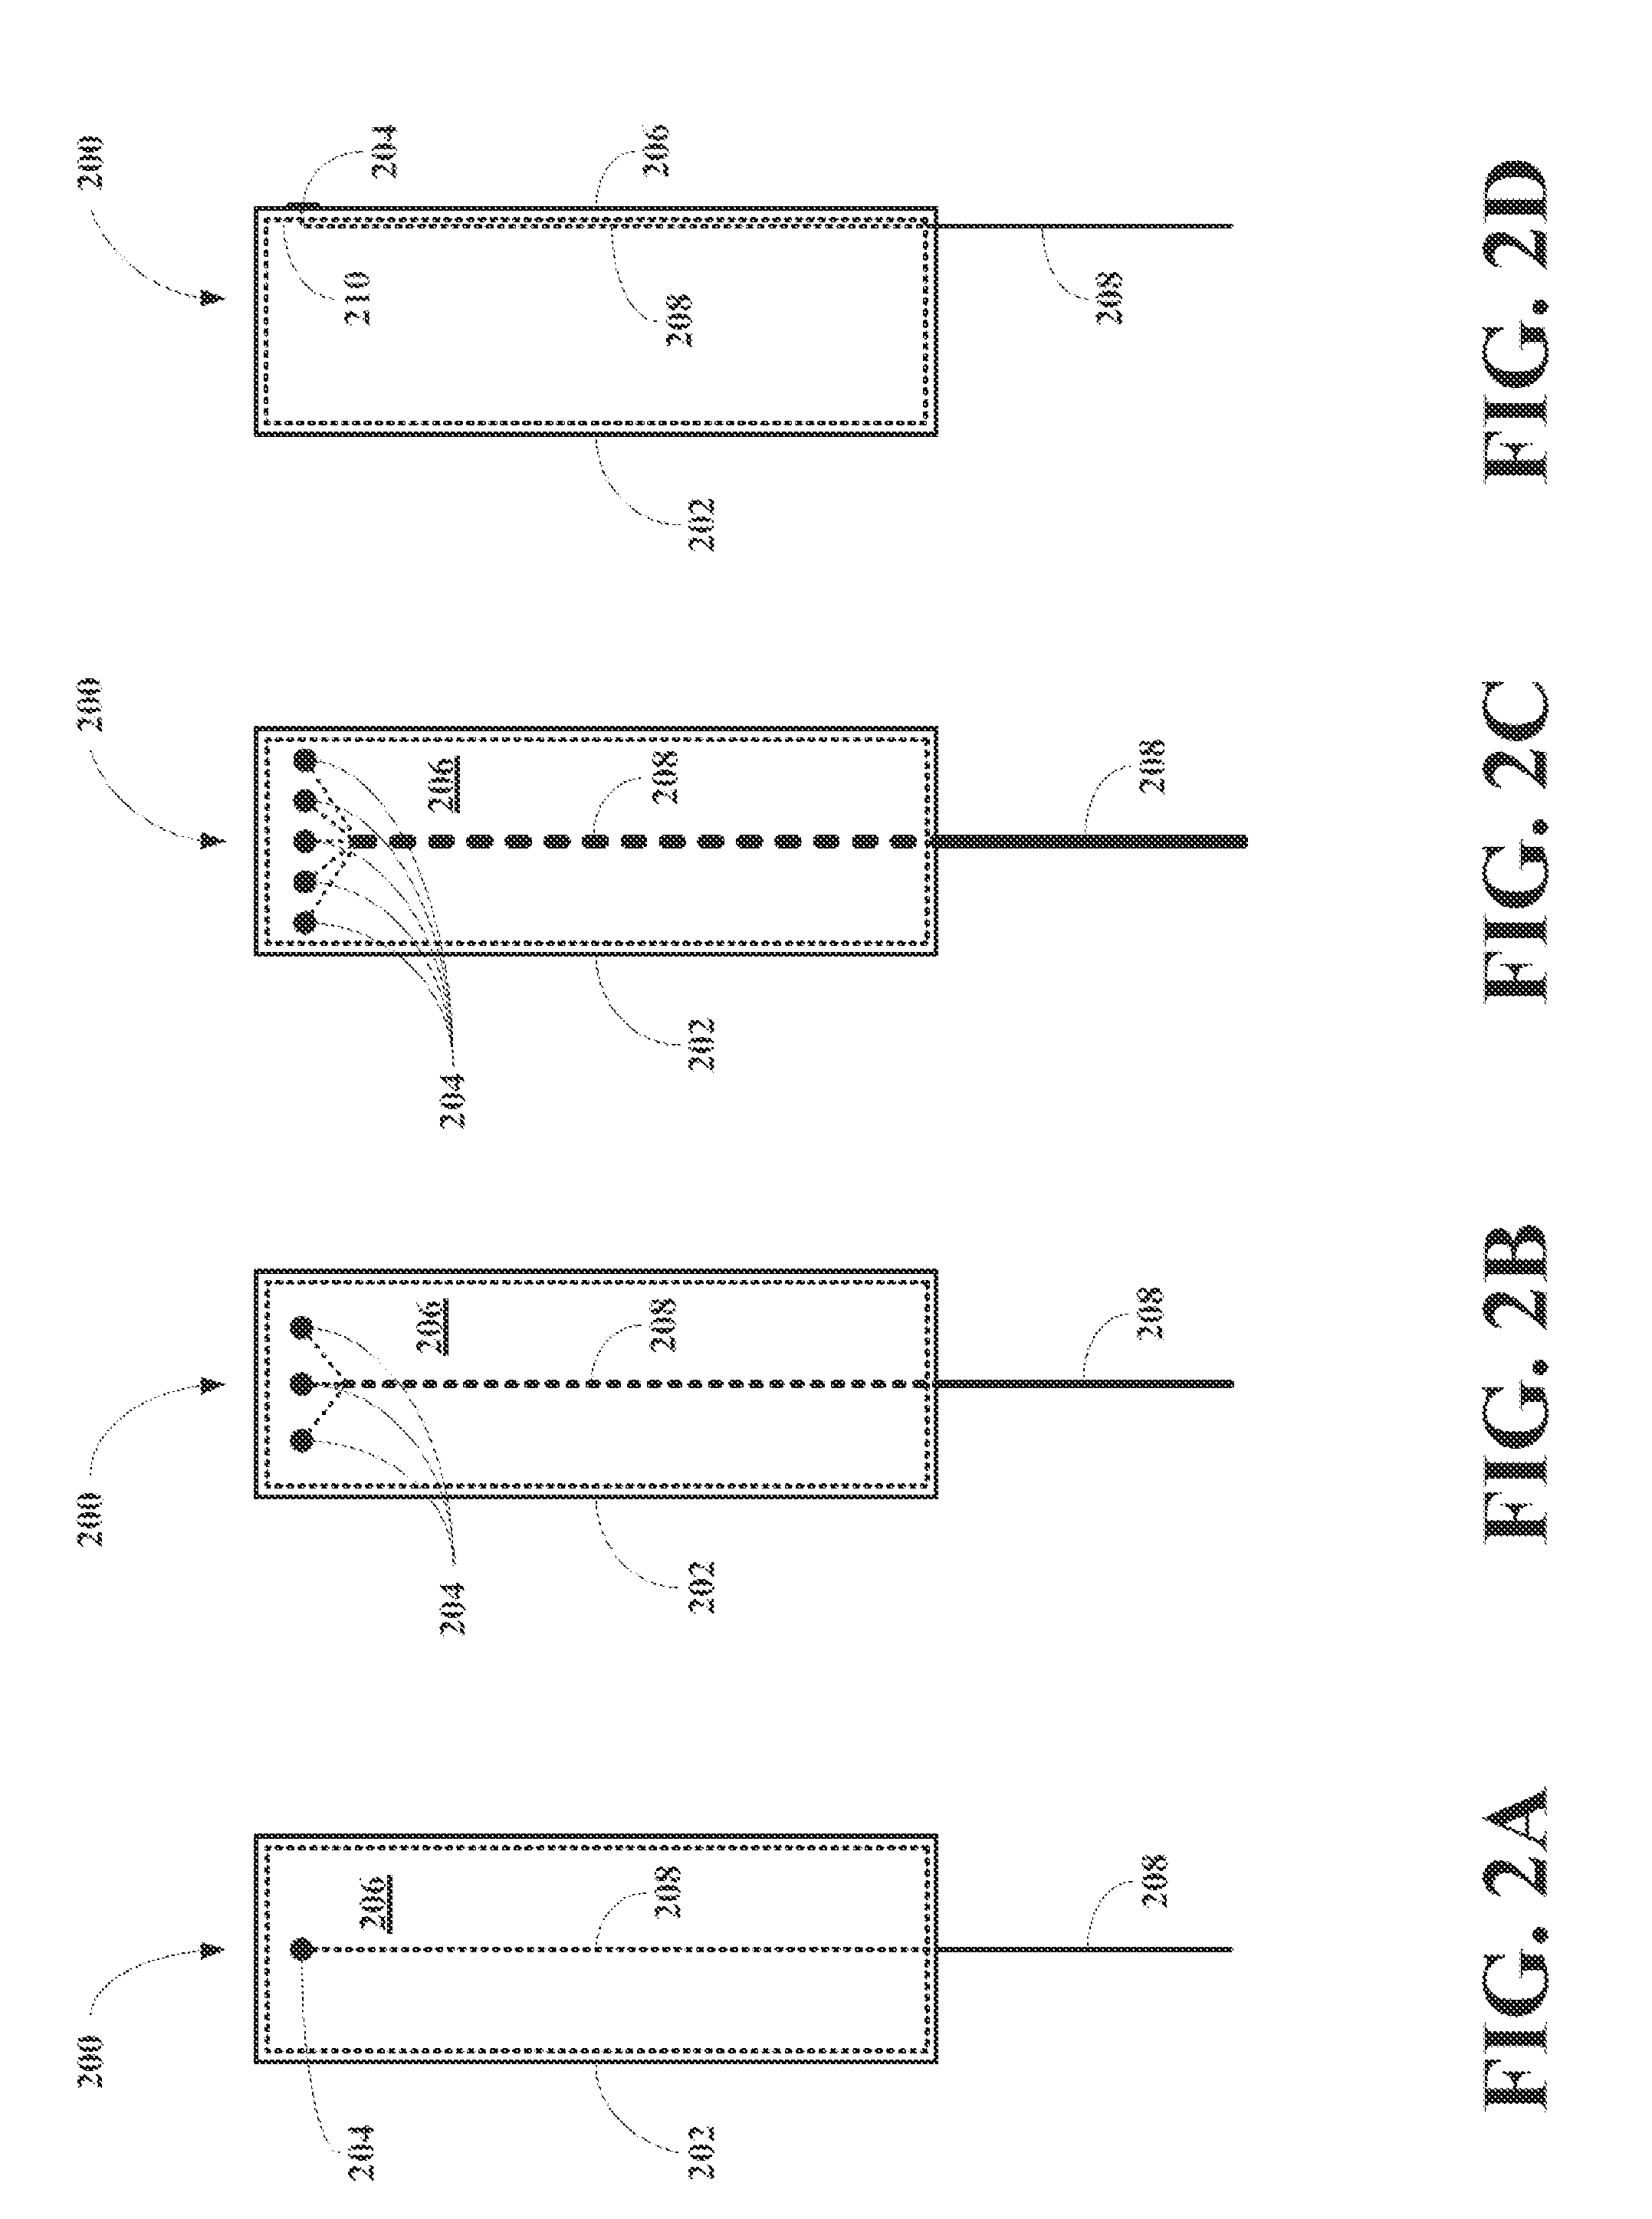 Methods and Apparatus for Optoacoustic Guidance and Confirmation of Placement of Indwelling Medical Apparatus